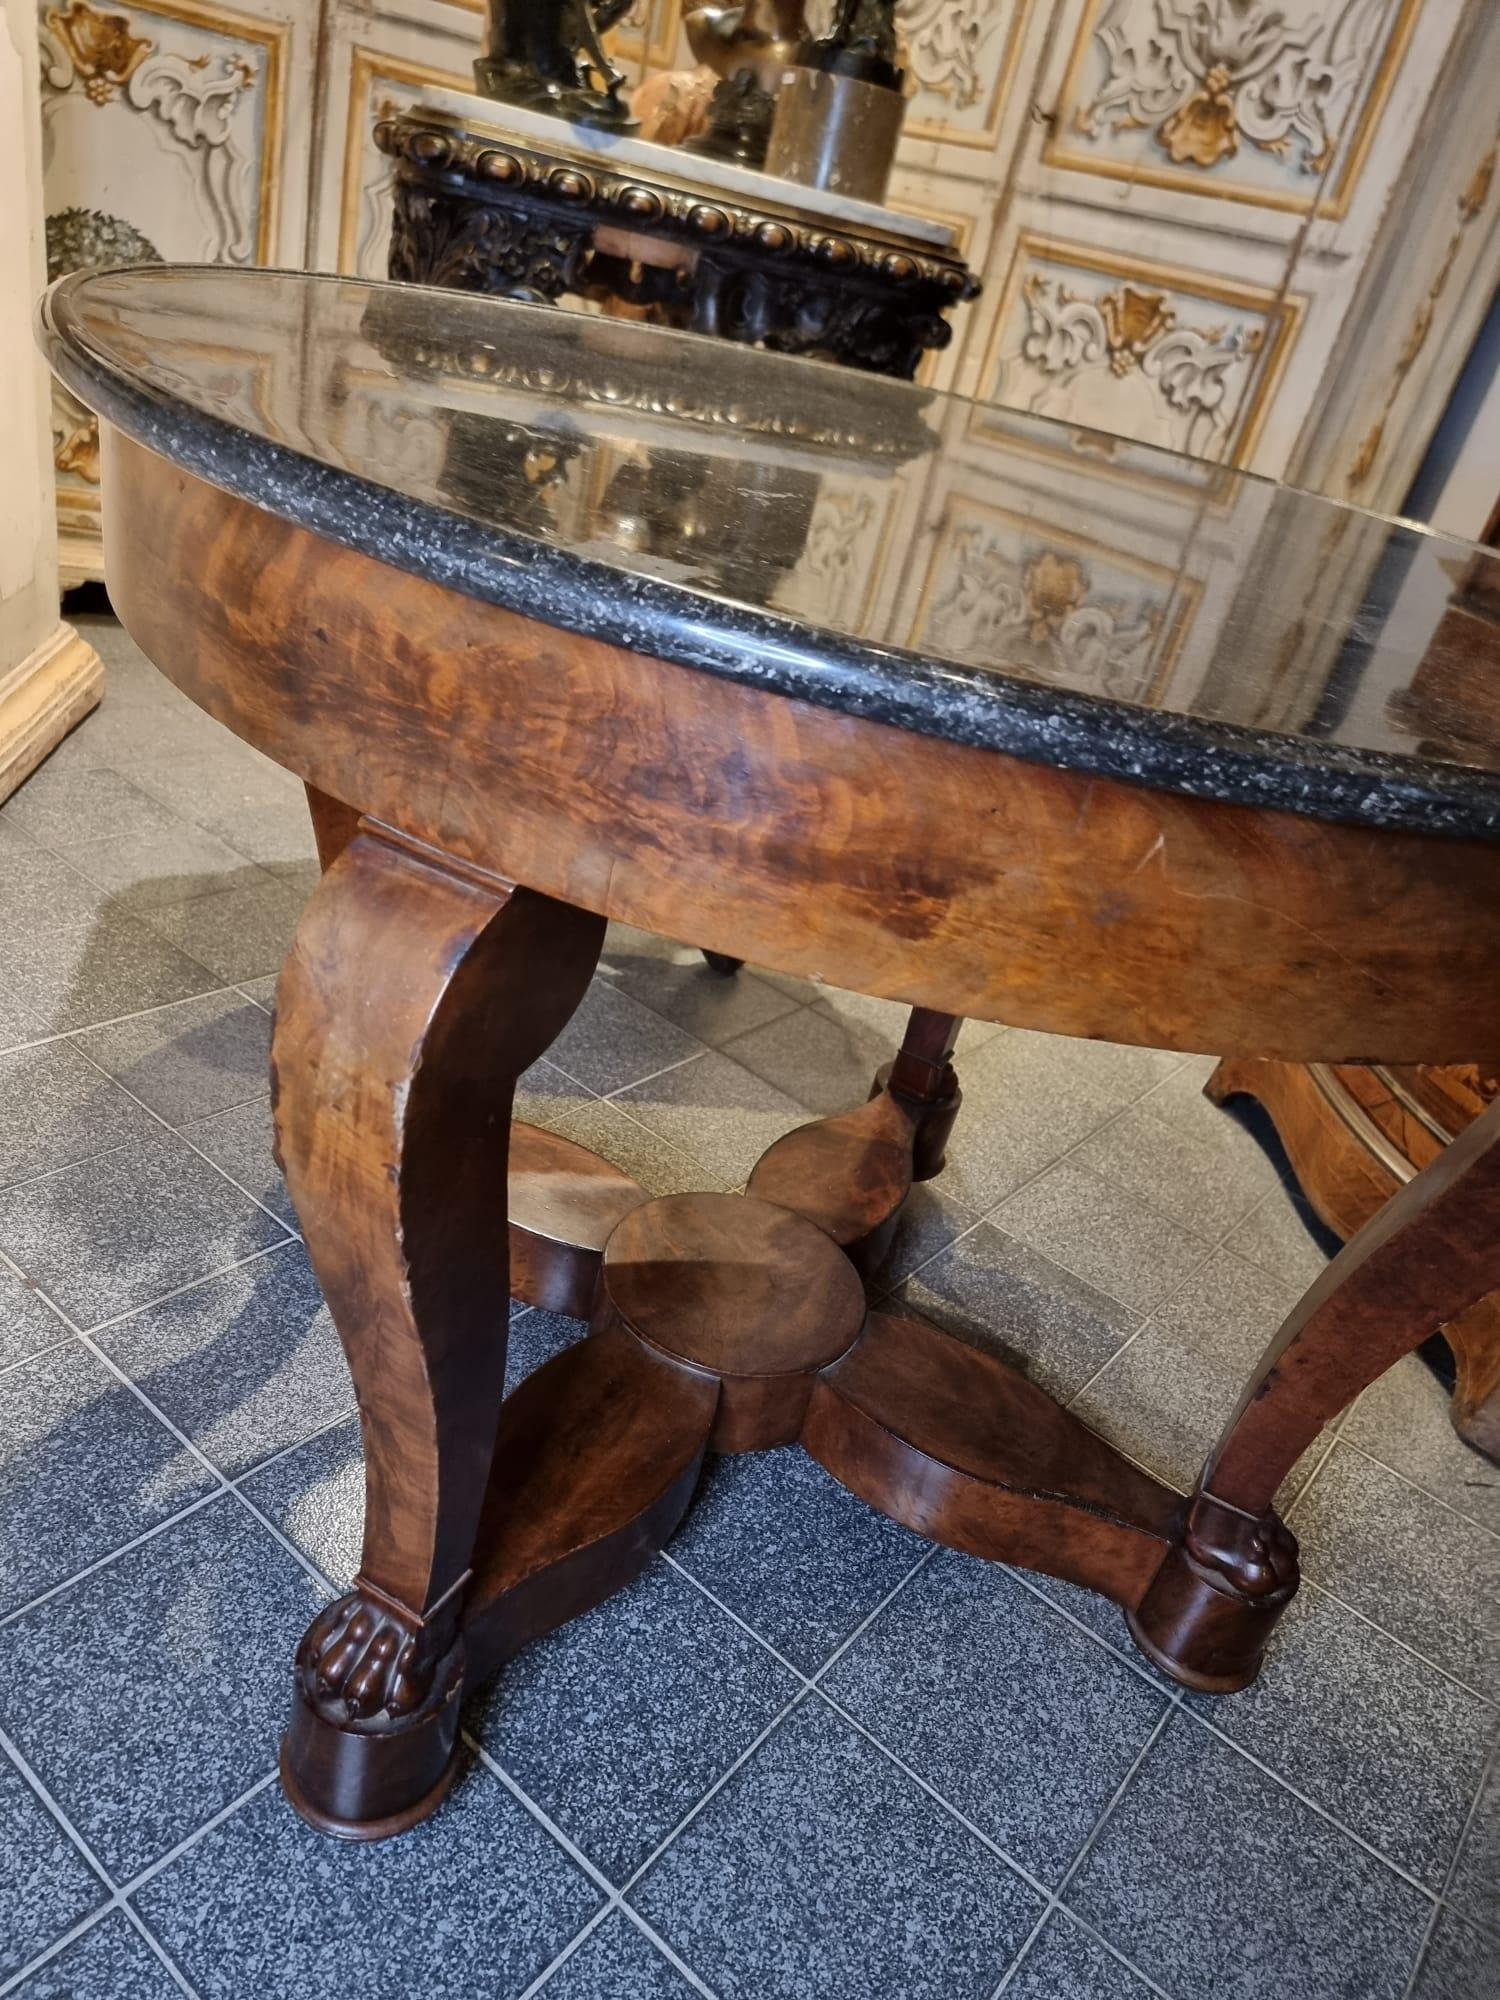 Important round table in mahogany wood and mahogany feather with four legs with feral paws resting on a cross and marble in shades of black, France, 19th century.

The table needs a restoration that will be done at our care and